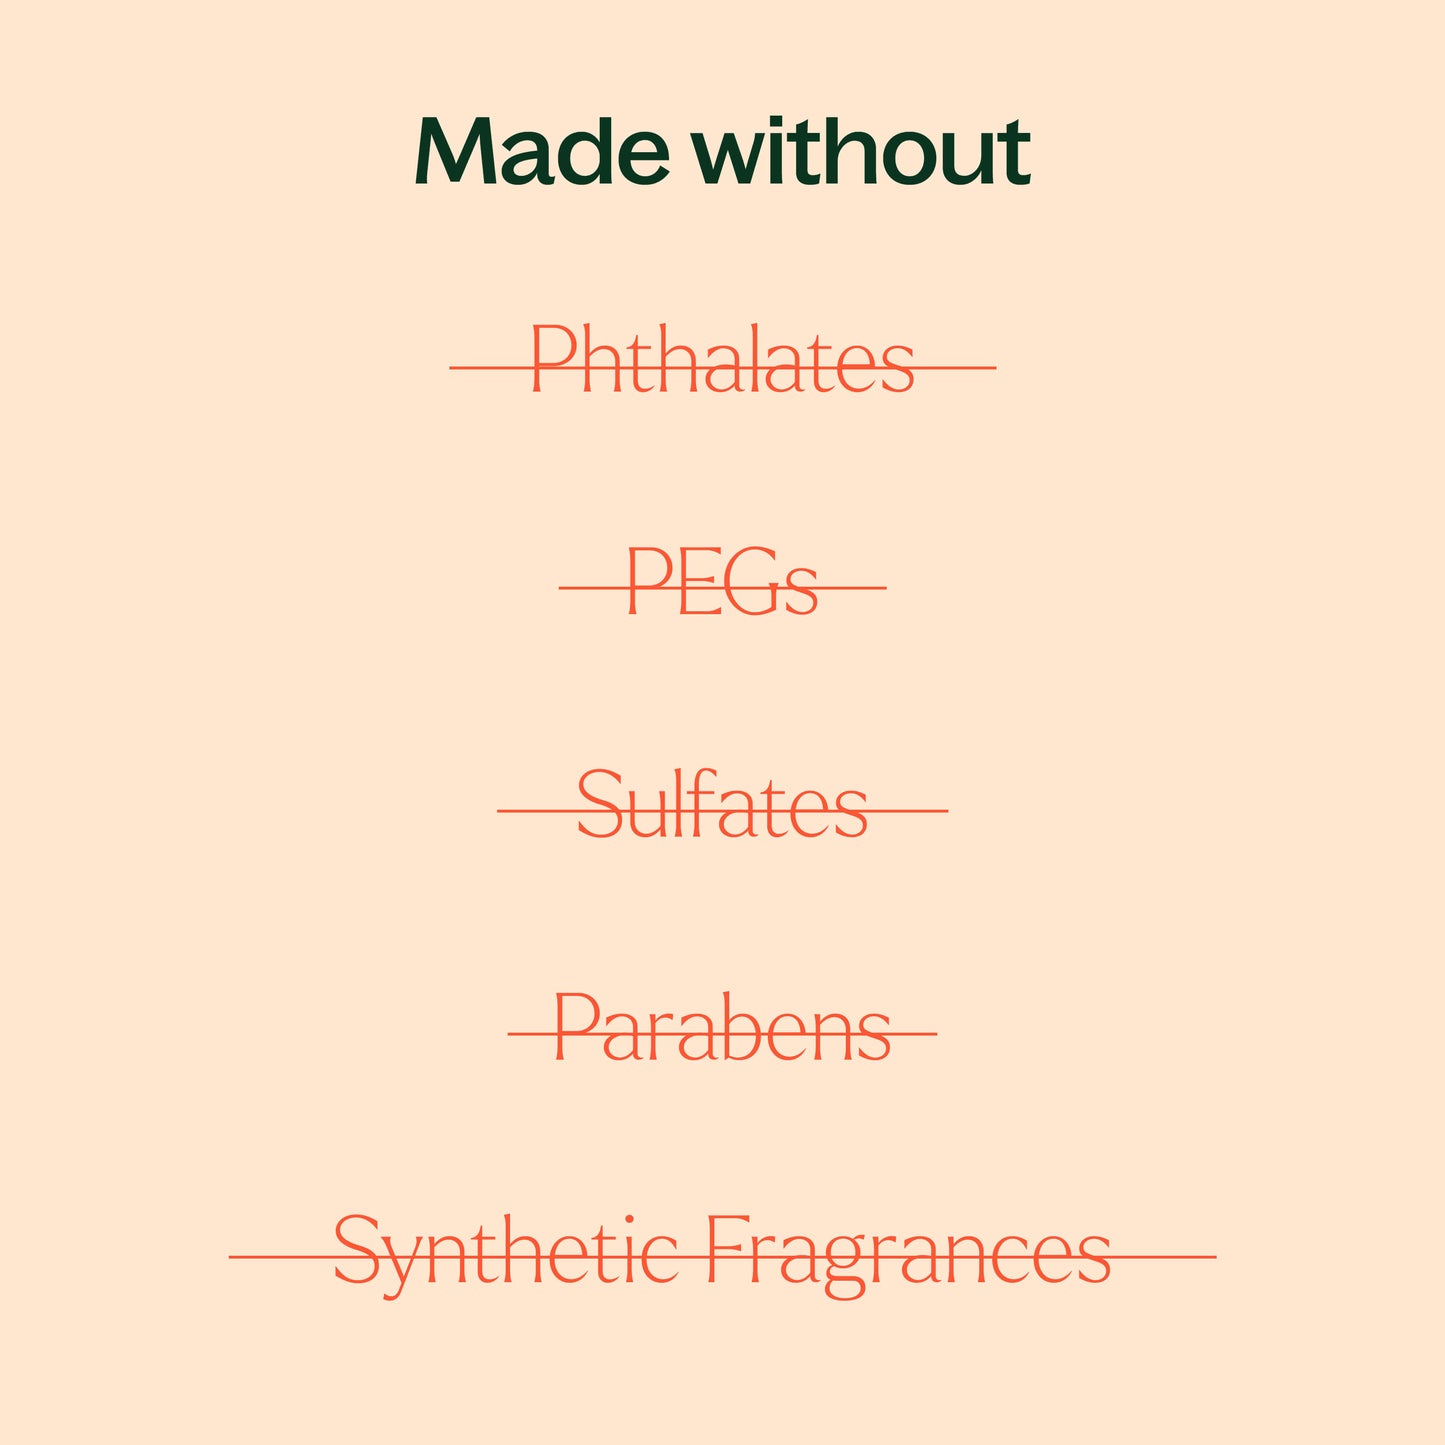 made without phthalates, PEGs, sulfates, parabens, synthetic fragrances